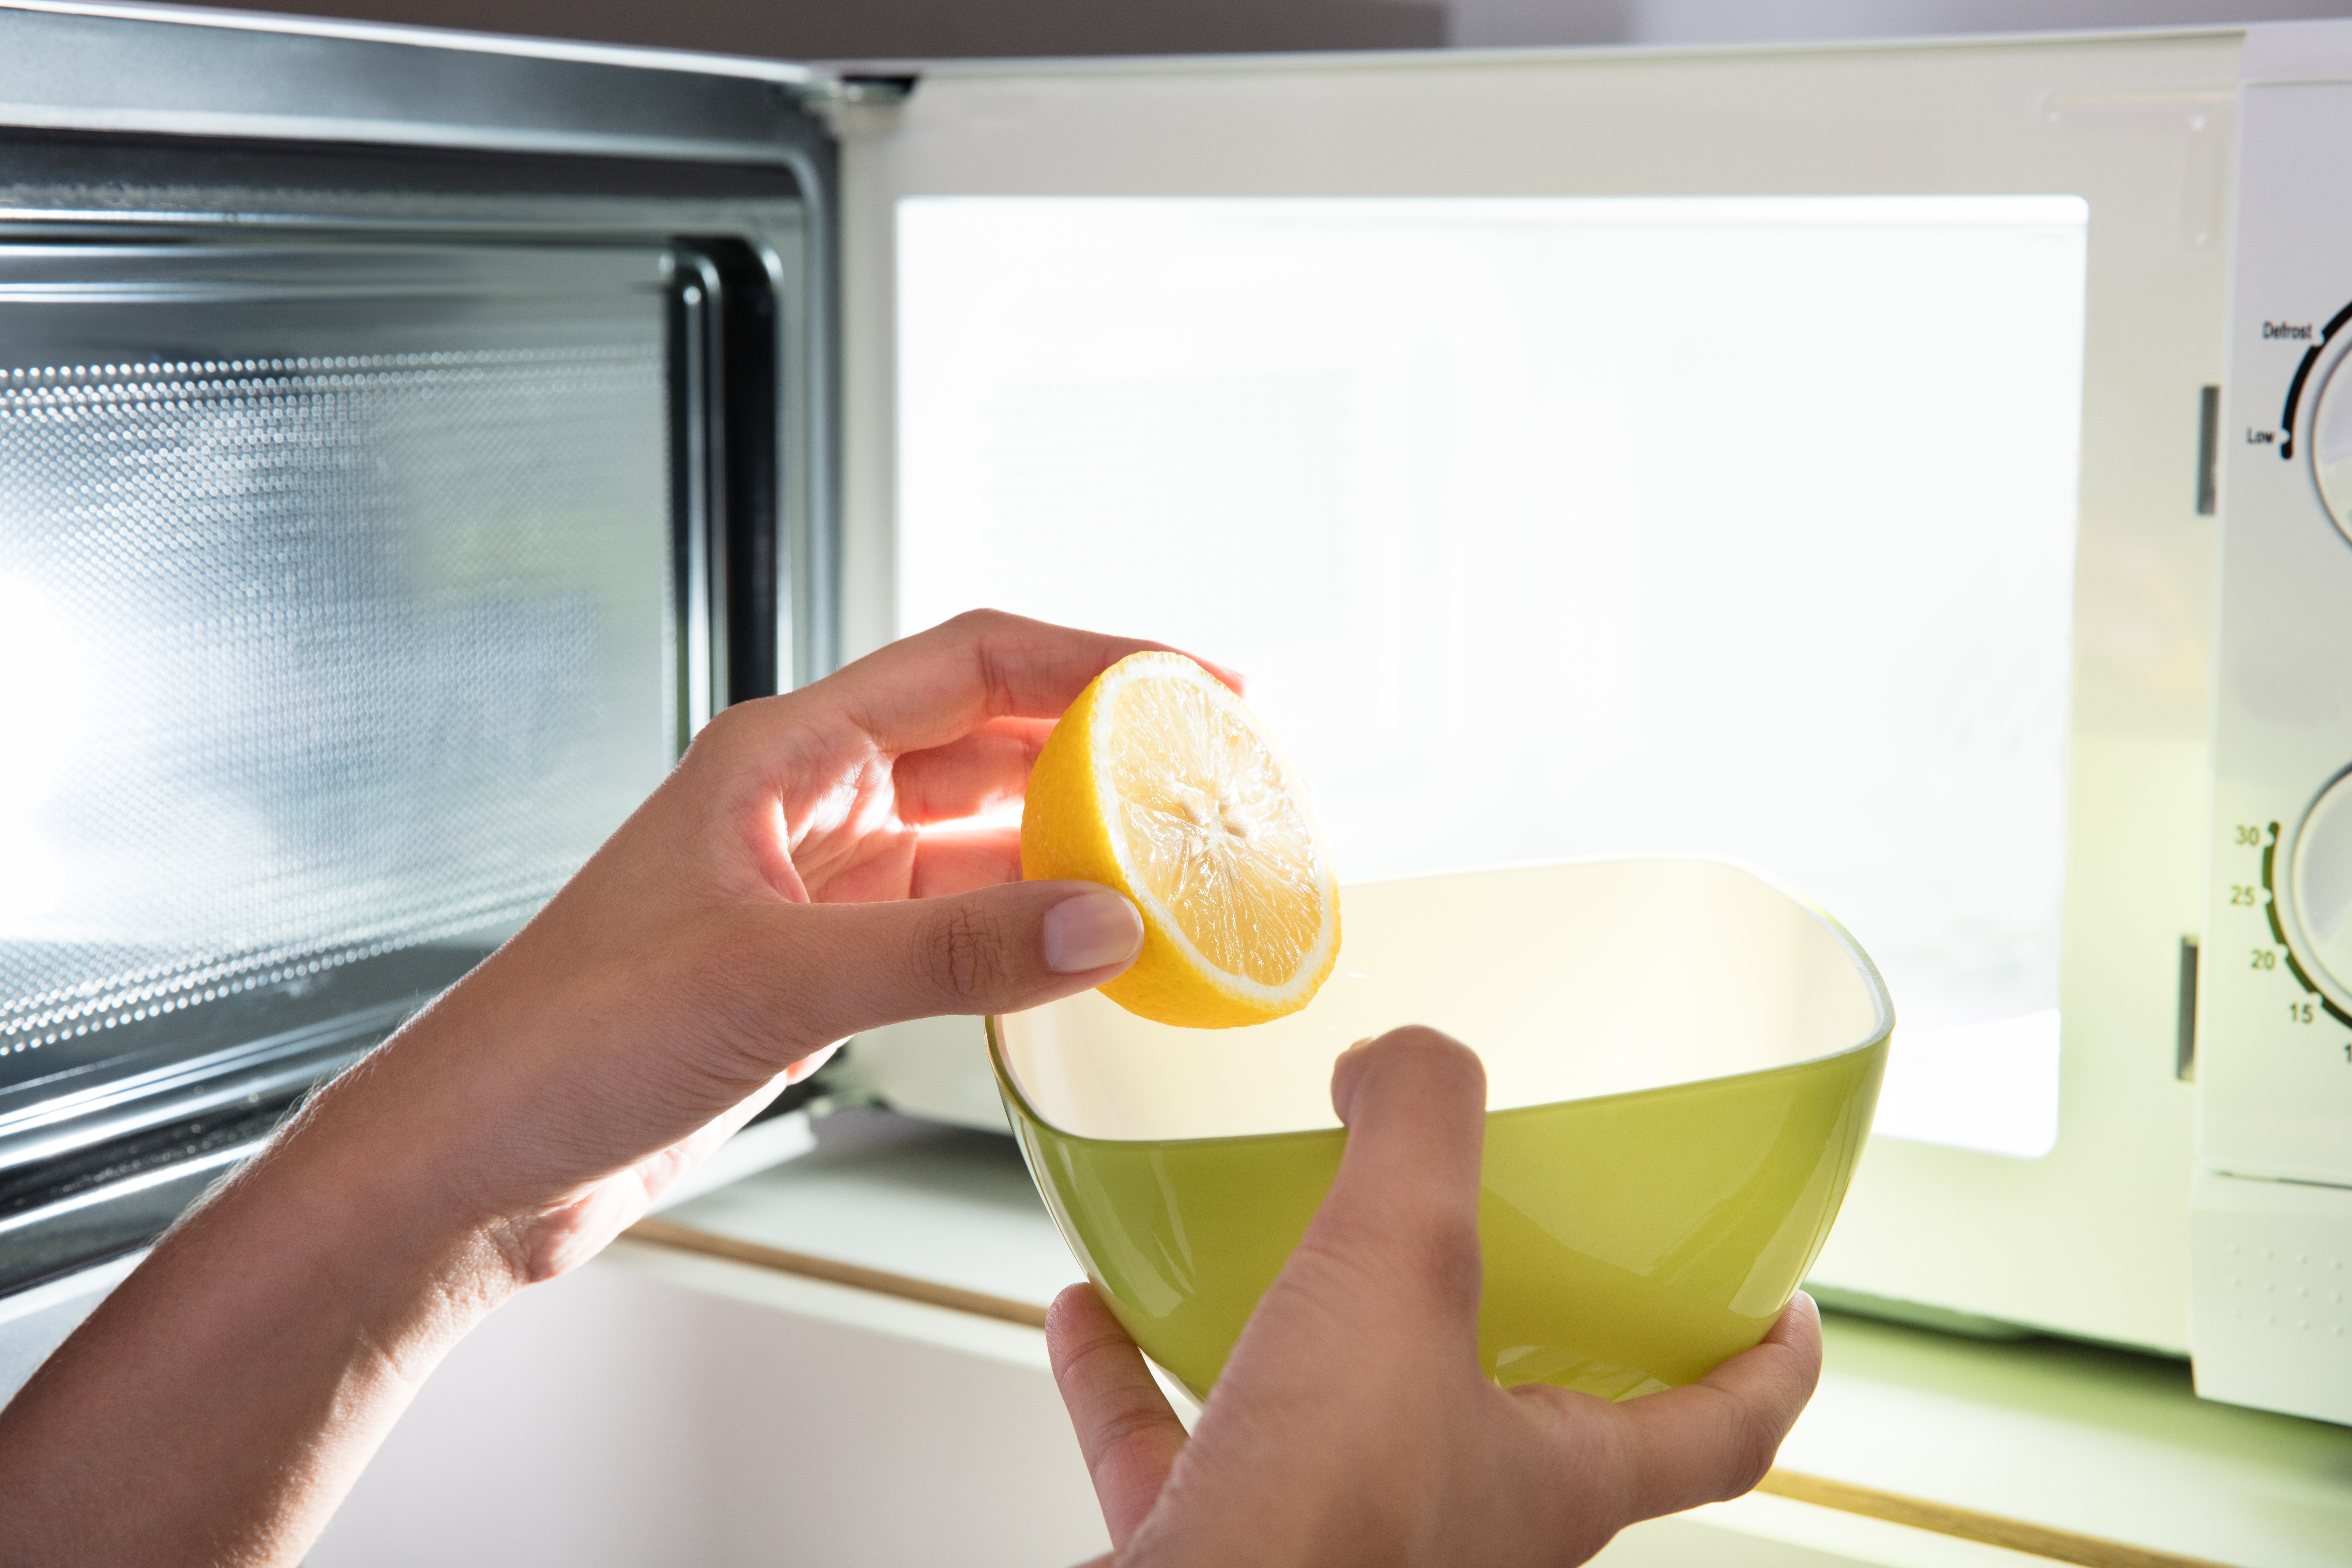 How to clean a Microwave with lemon